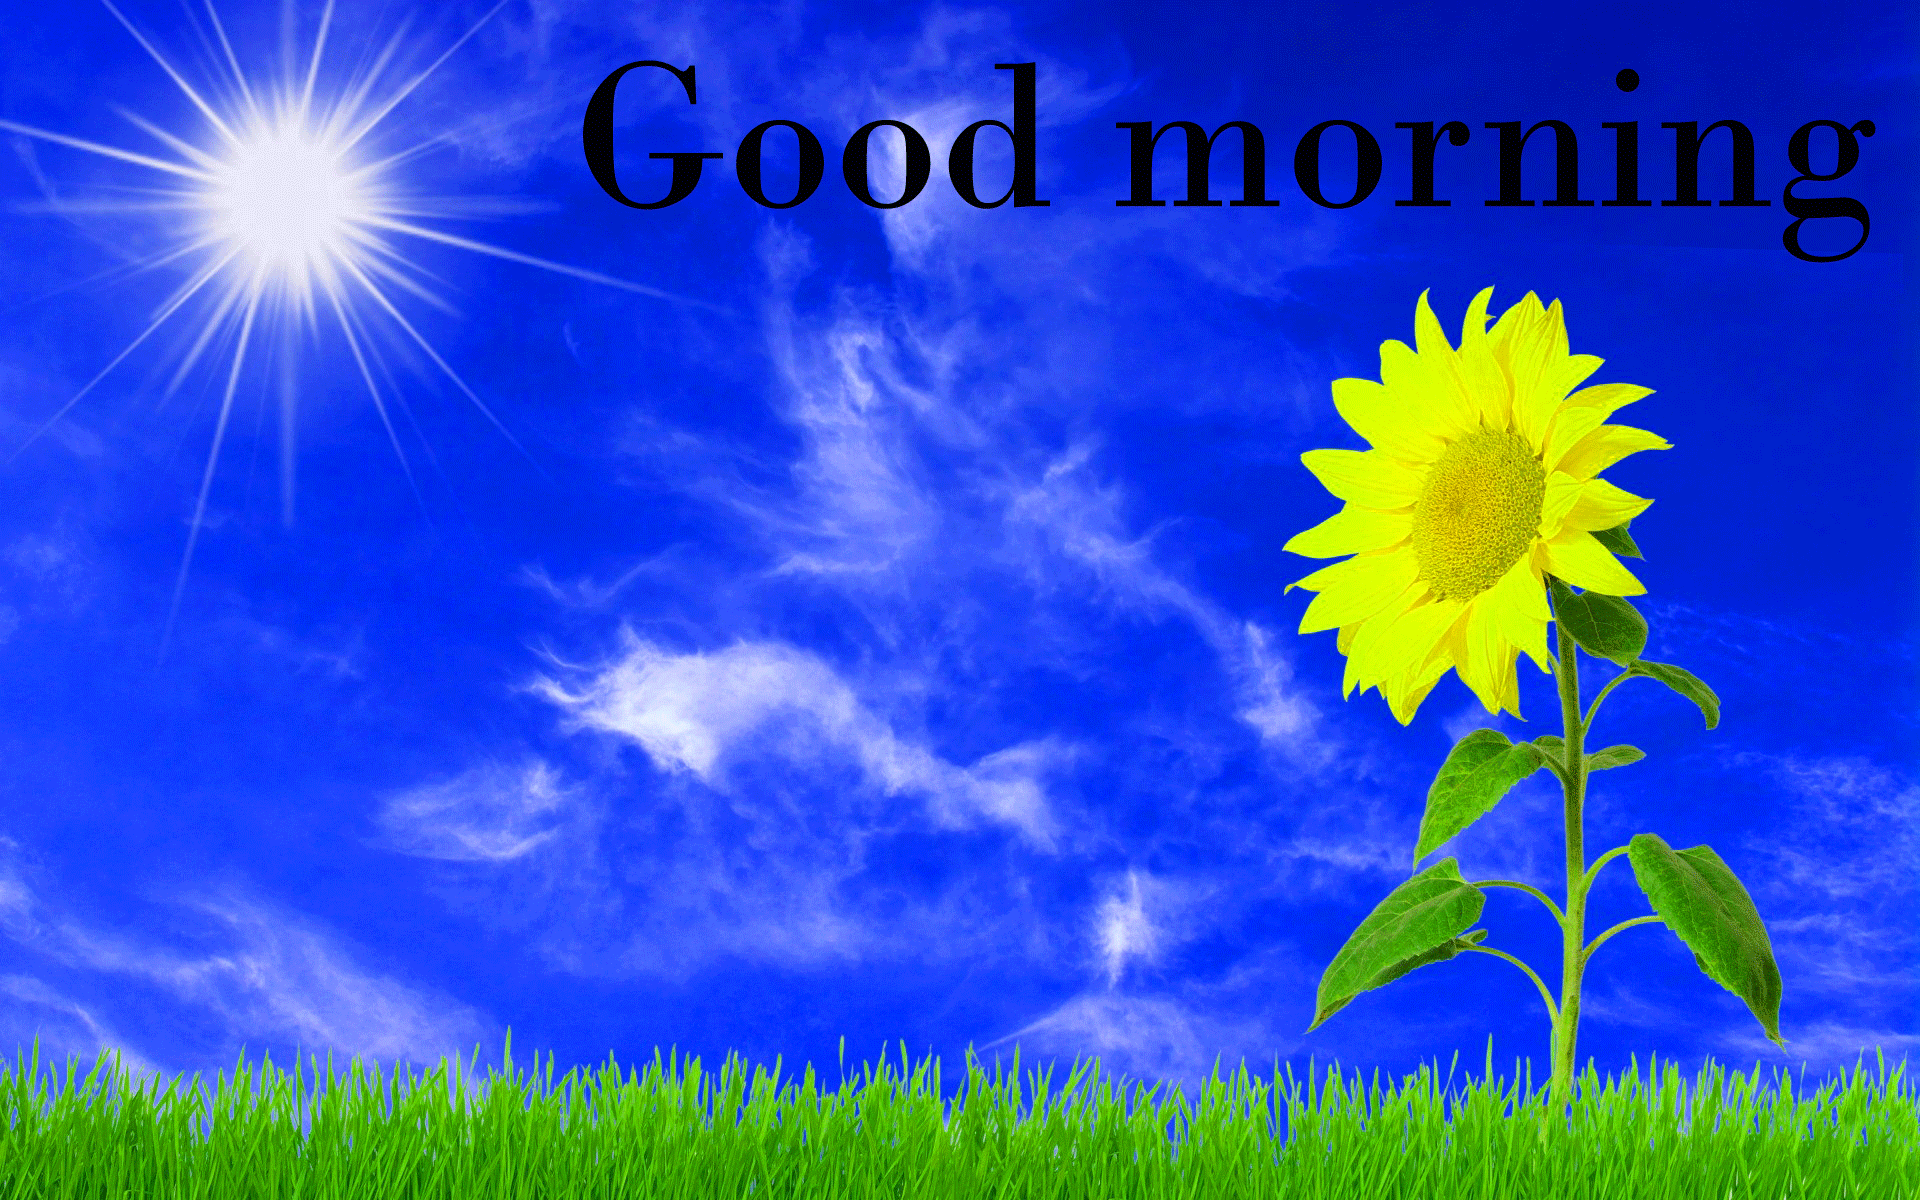 Sunflower Good Morning Wallpaper Pictures Pics HD Samsung Lcd